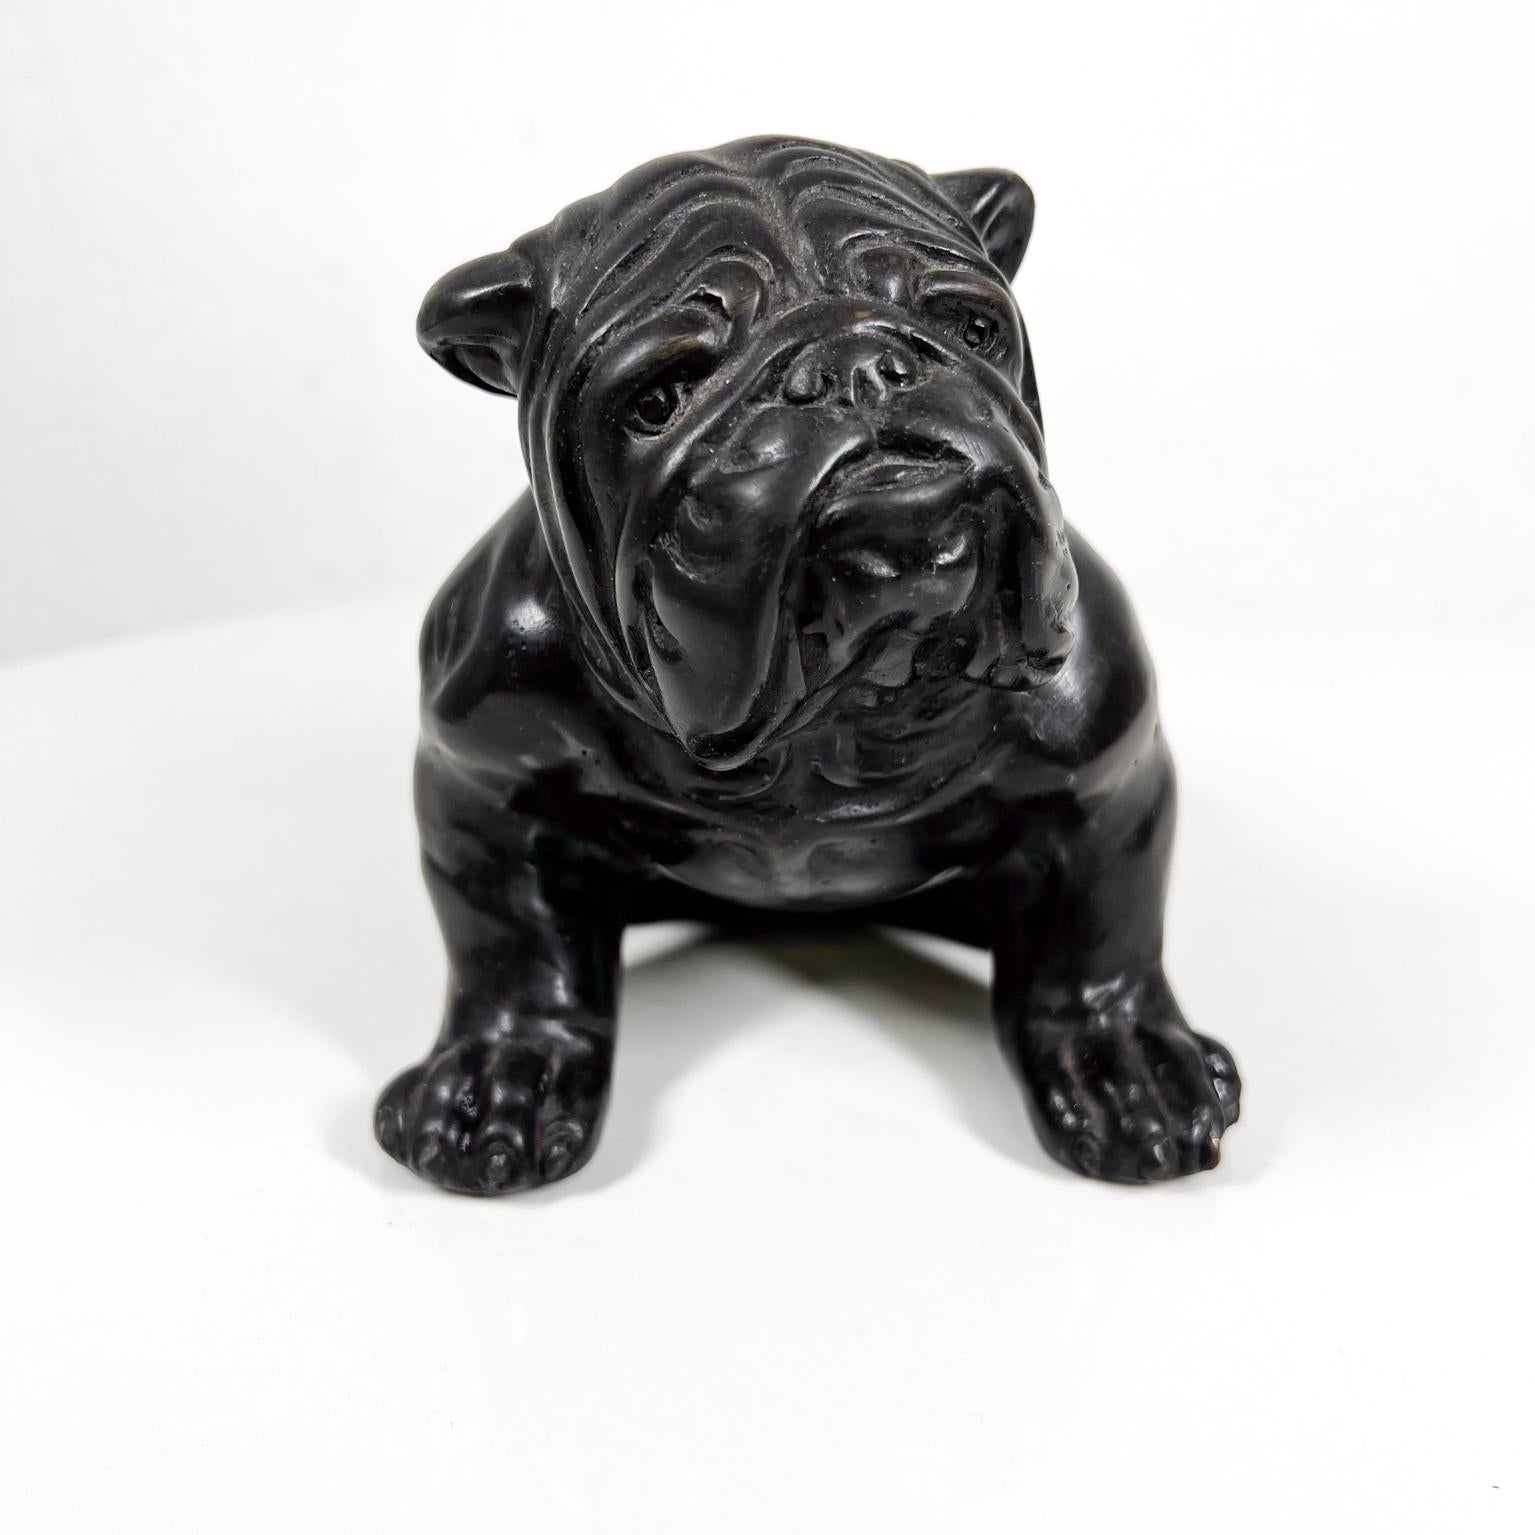 Vintage English Bull Dog Sculpture Figurine
Bronze
7.38 d x 5 w x 5.25 tall
Preowned original vintage condition.
Please refer to images.